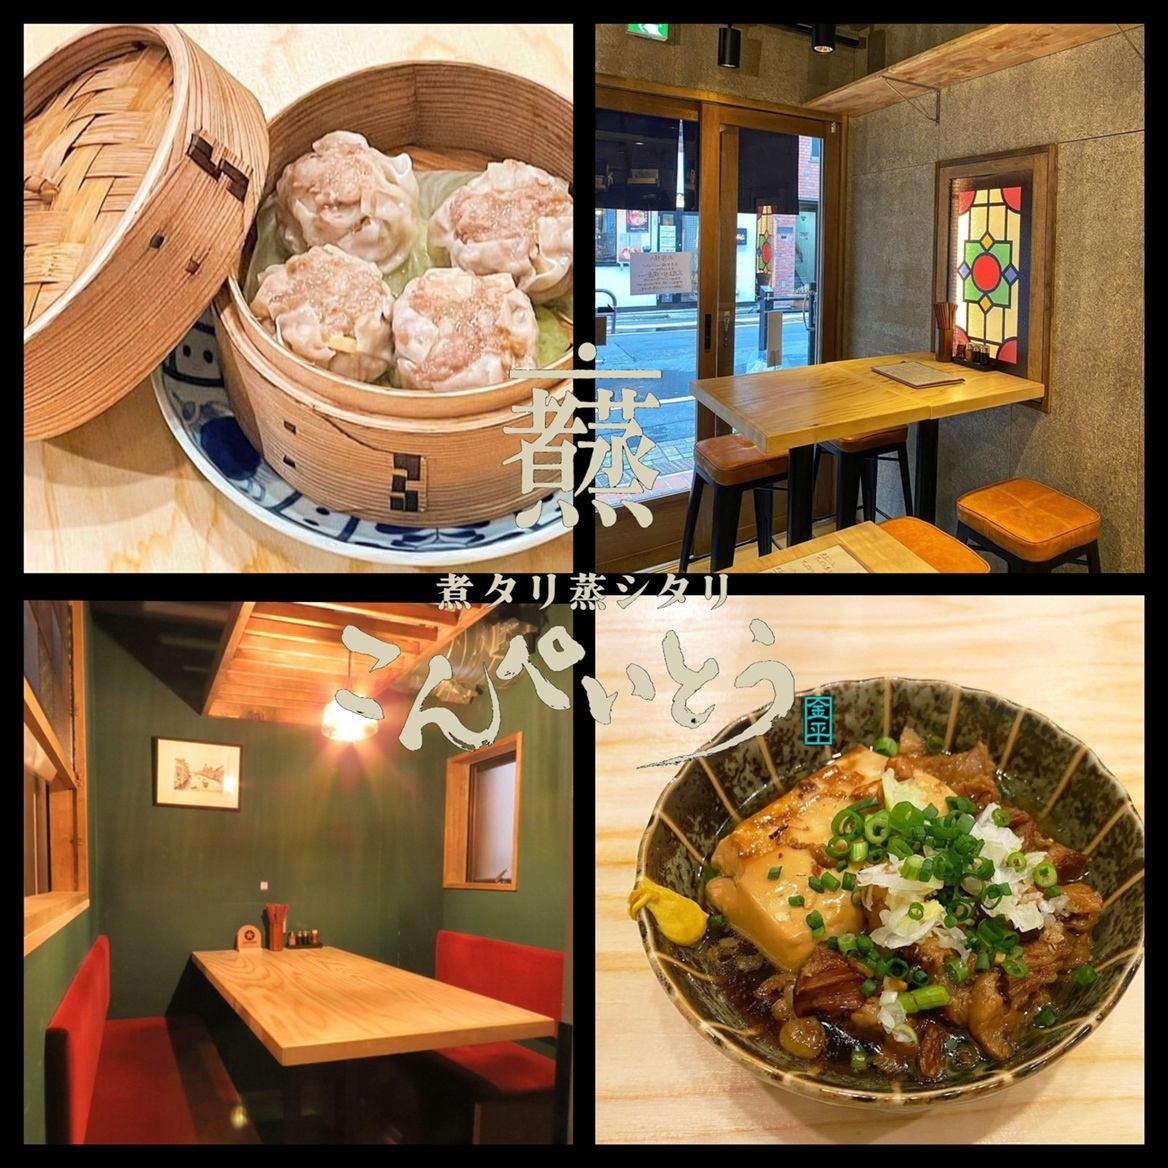 ◆ Good location, 1 minute walk from Iidabashi station! ◆ Izakaya boasts a calm atmosphere even with a small number of people